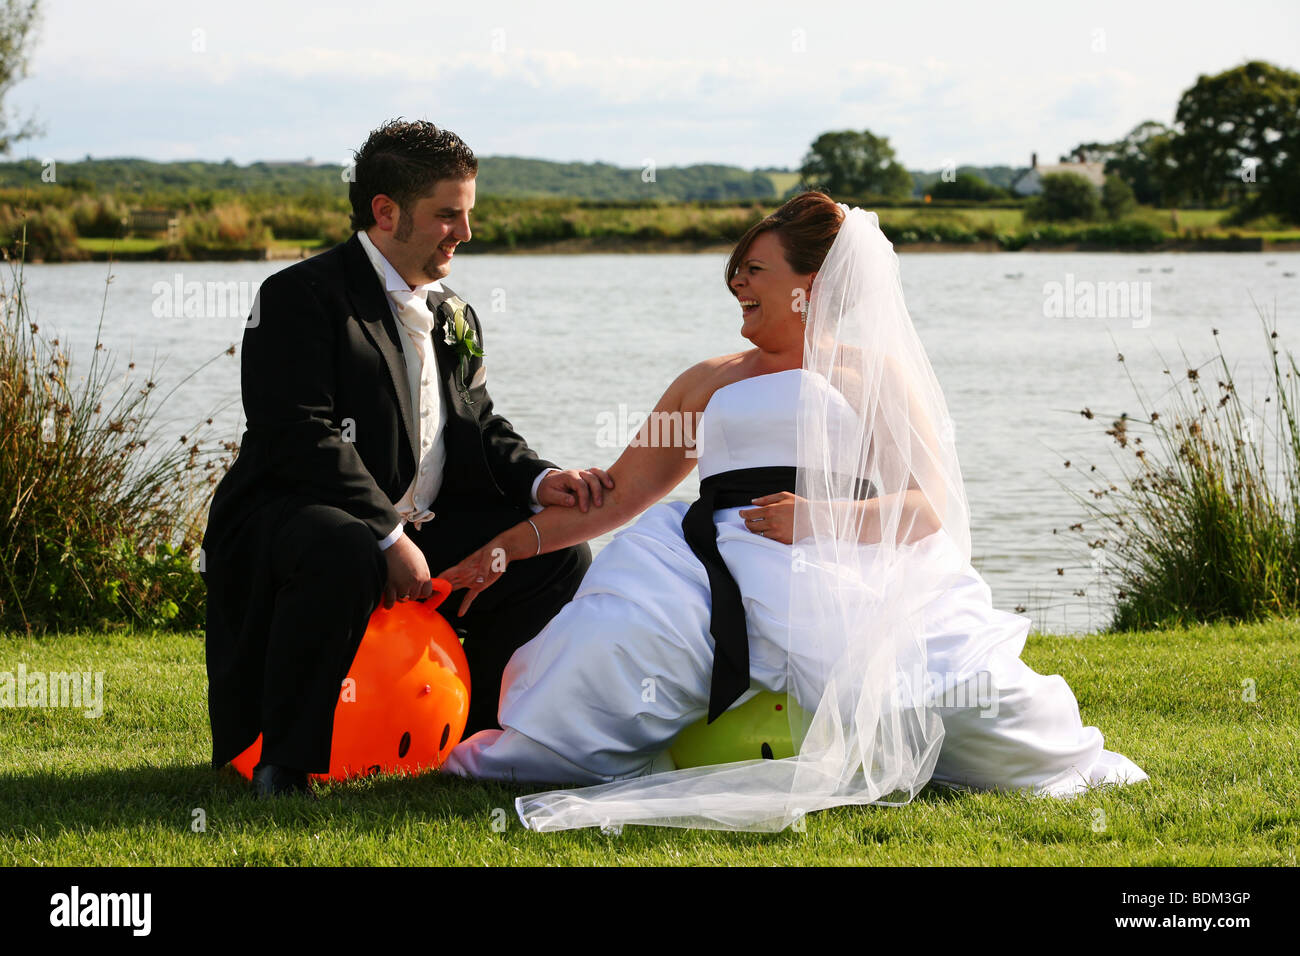 Bride and Groom relax have fun on colourful space hopper toys on wedding day next to edge of lake on grass UK Stock Photo